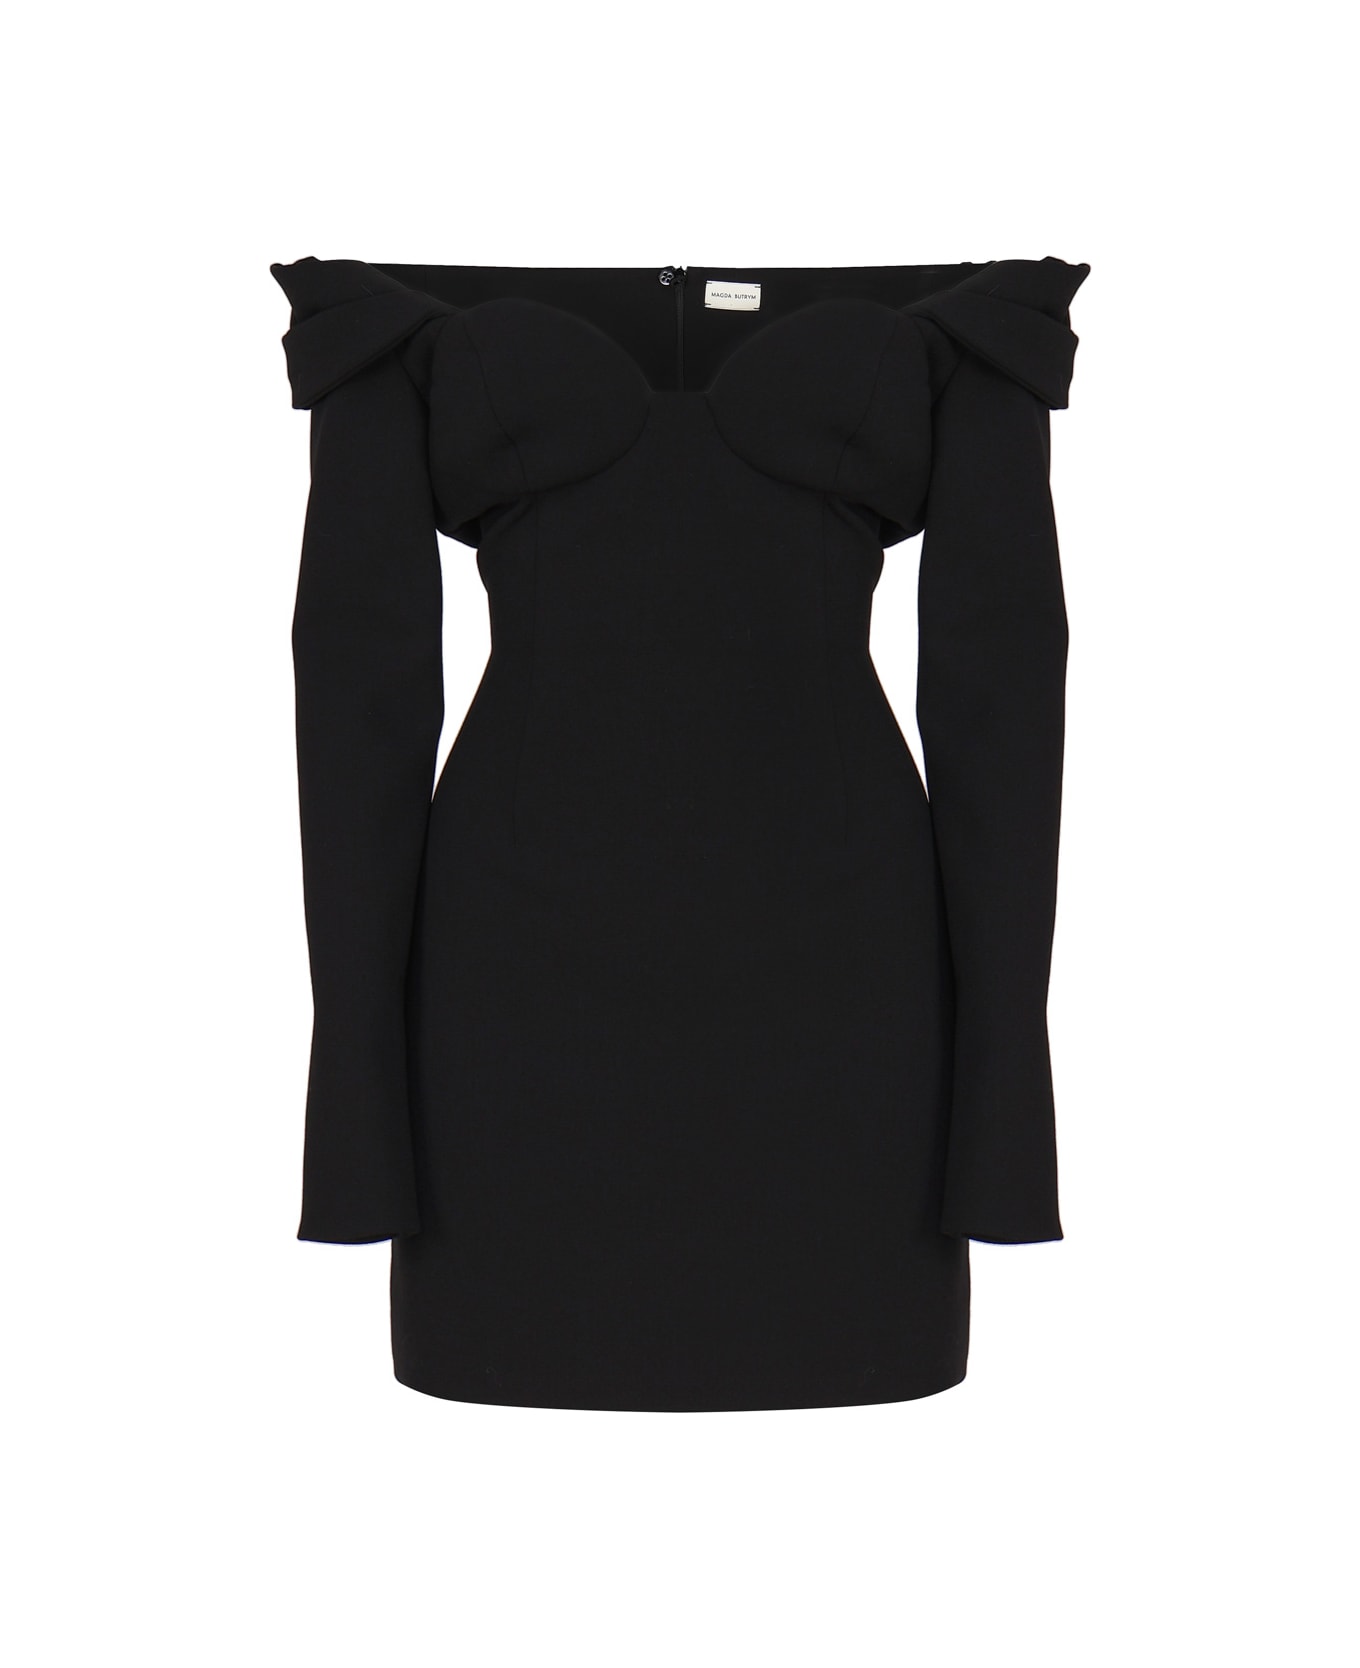 Magda Butrym Black Mini Dress With Bustier And Bare Shoulders - Black